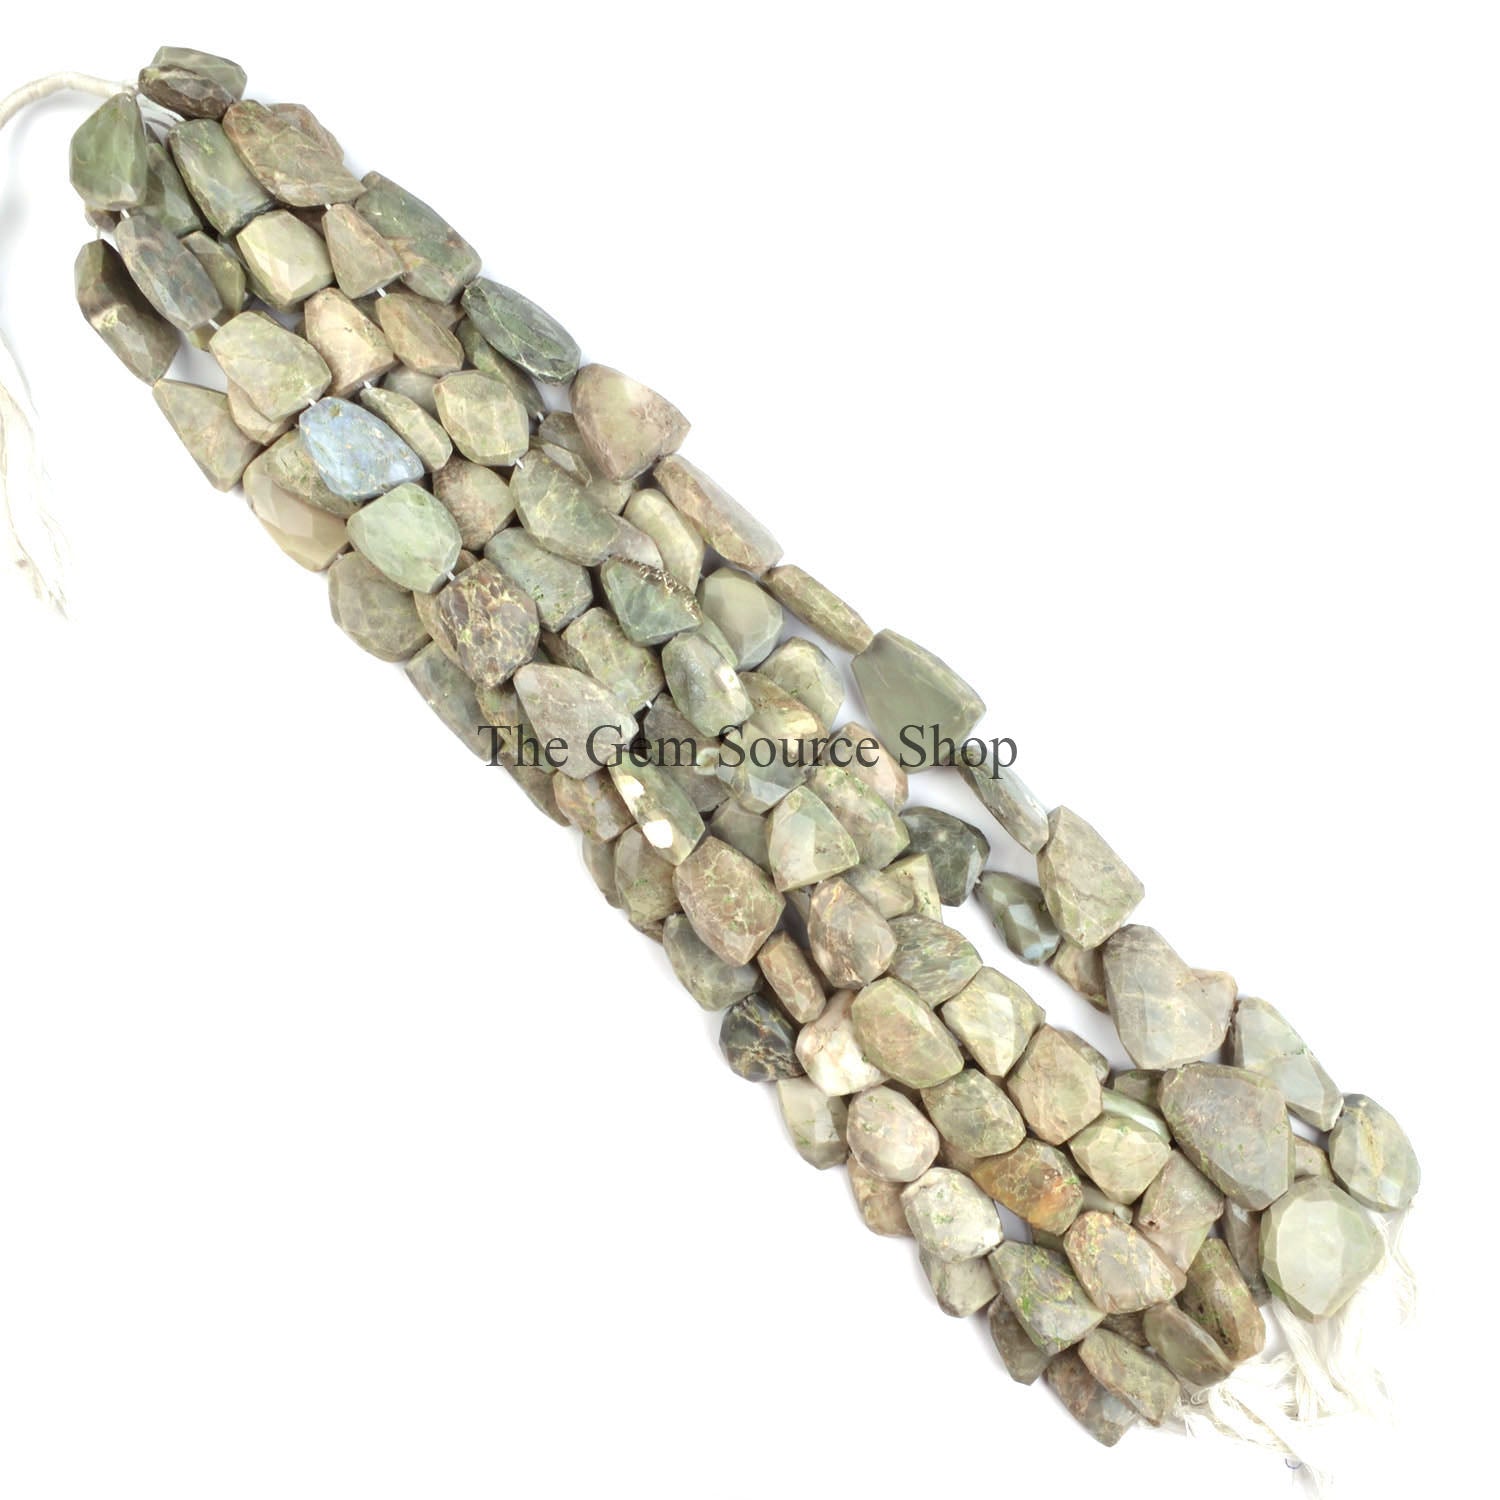 Green Opal Faceted Nugget Gemstone Beads, Green Opal Faceted Gemstone Beads, A Quality, ,Gemstone for Jewelry Making